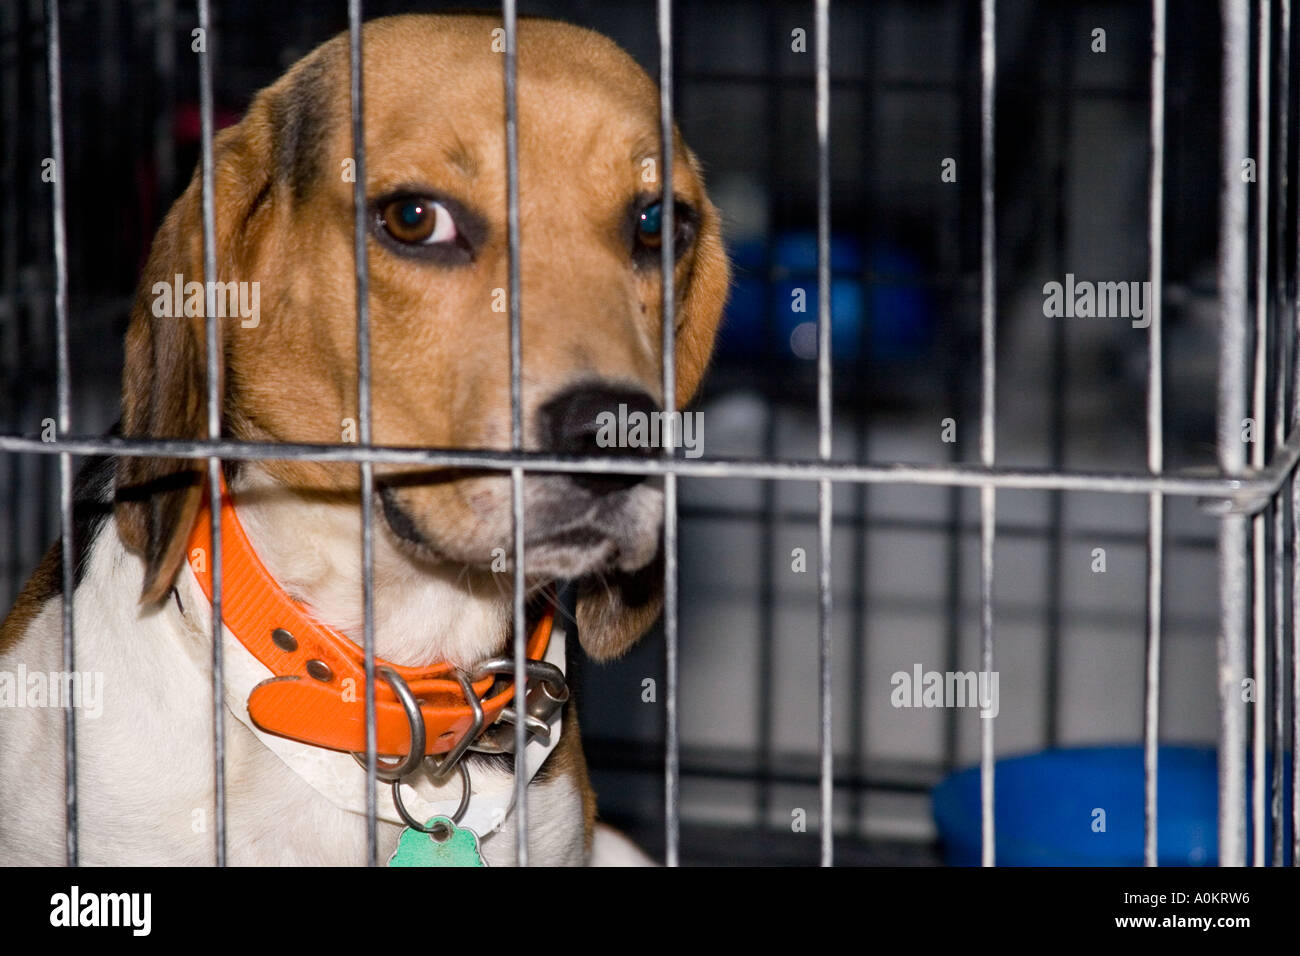 A sad looking abandoned dog looks out from his cage in an animal shelter during the aftermath of Hurricane Katrina Stock Photo